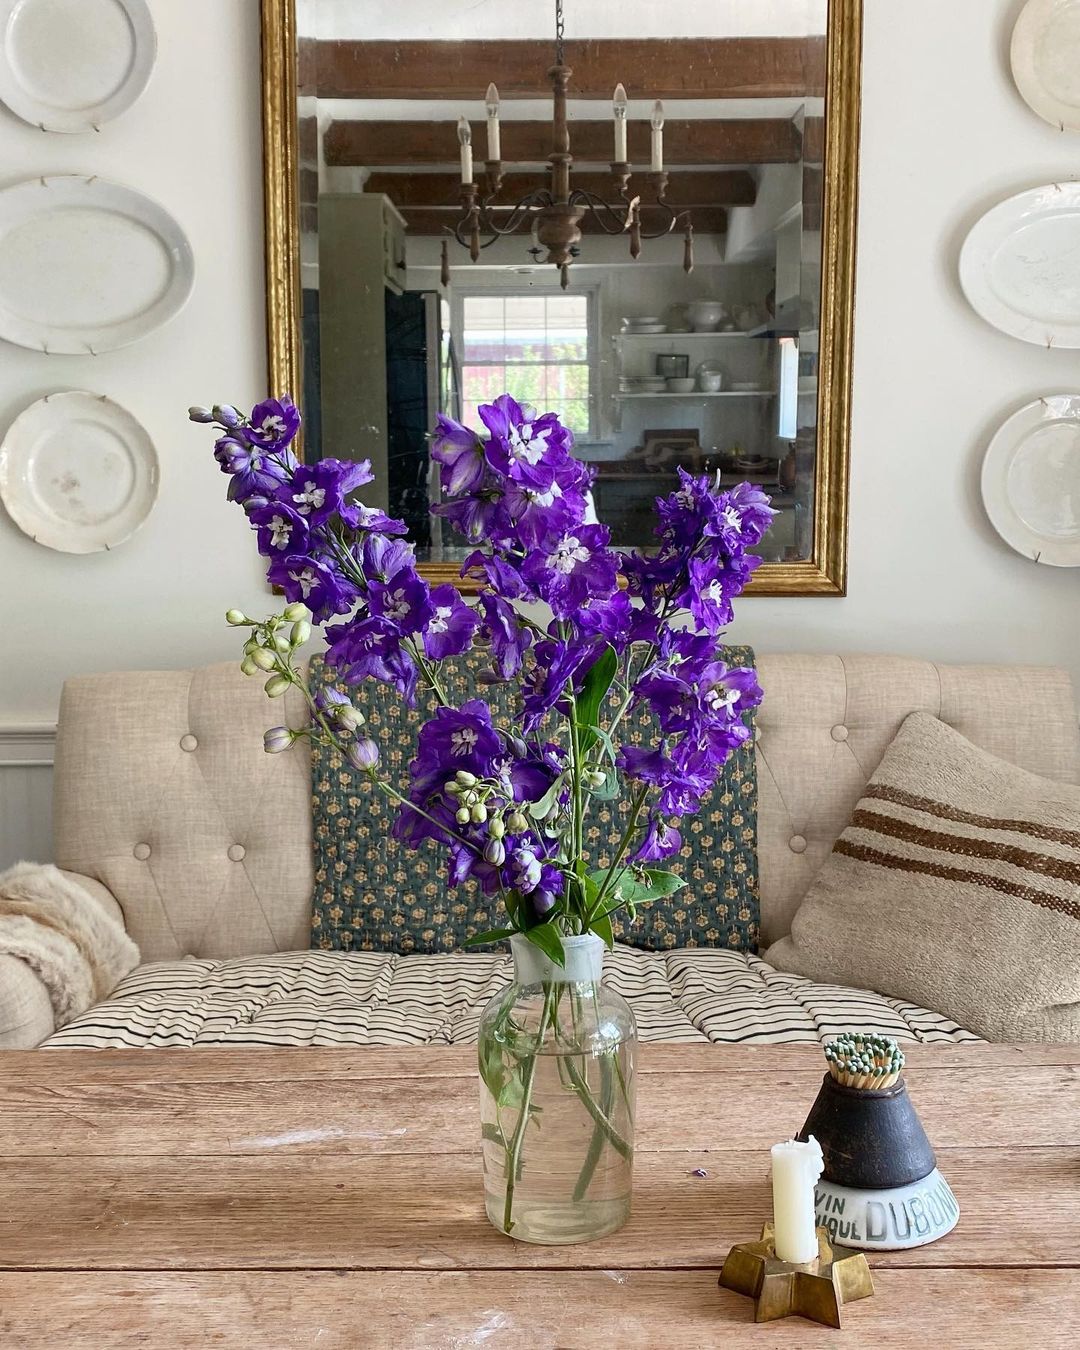 Coffee table with Delphinium flower. Photo by Instagram user @megan.d.miller